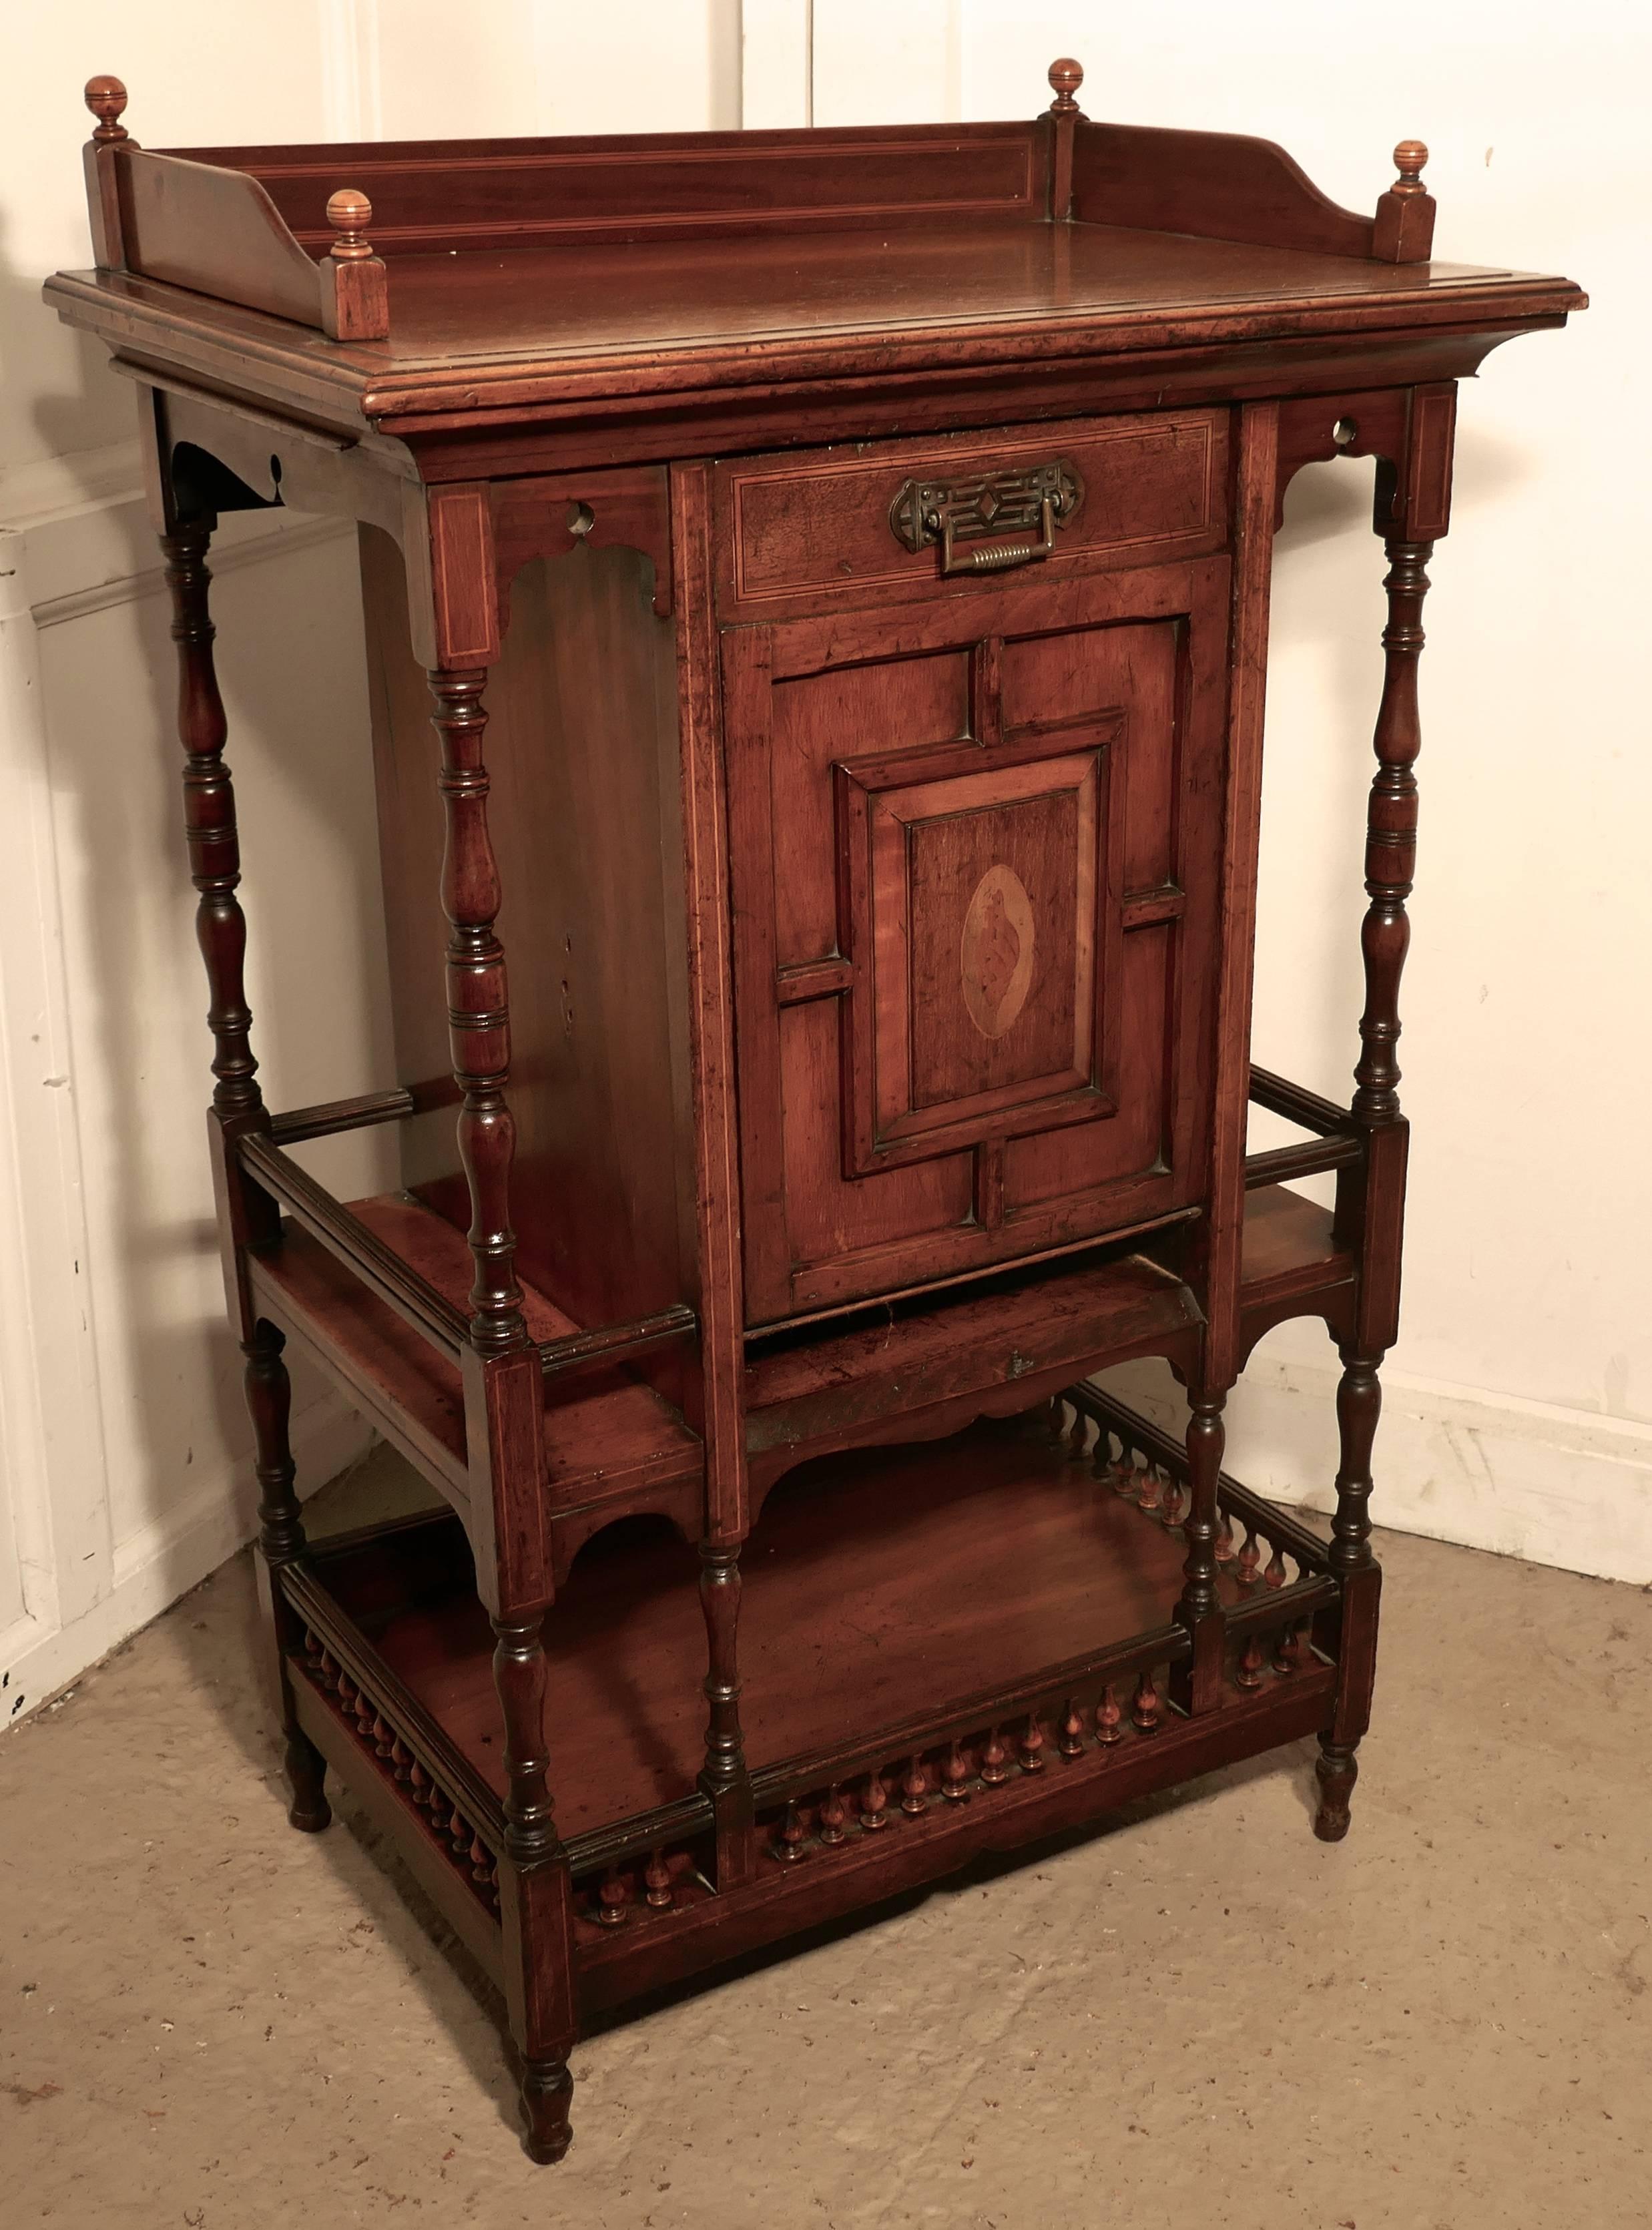 Edwardian Mahogany Batchelor’s Fireside Companion, Purdonium Whatnot In Fair Condition In Chillerton, Isle of Wight